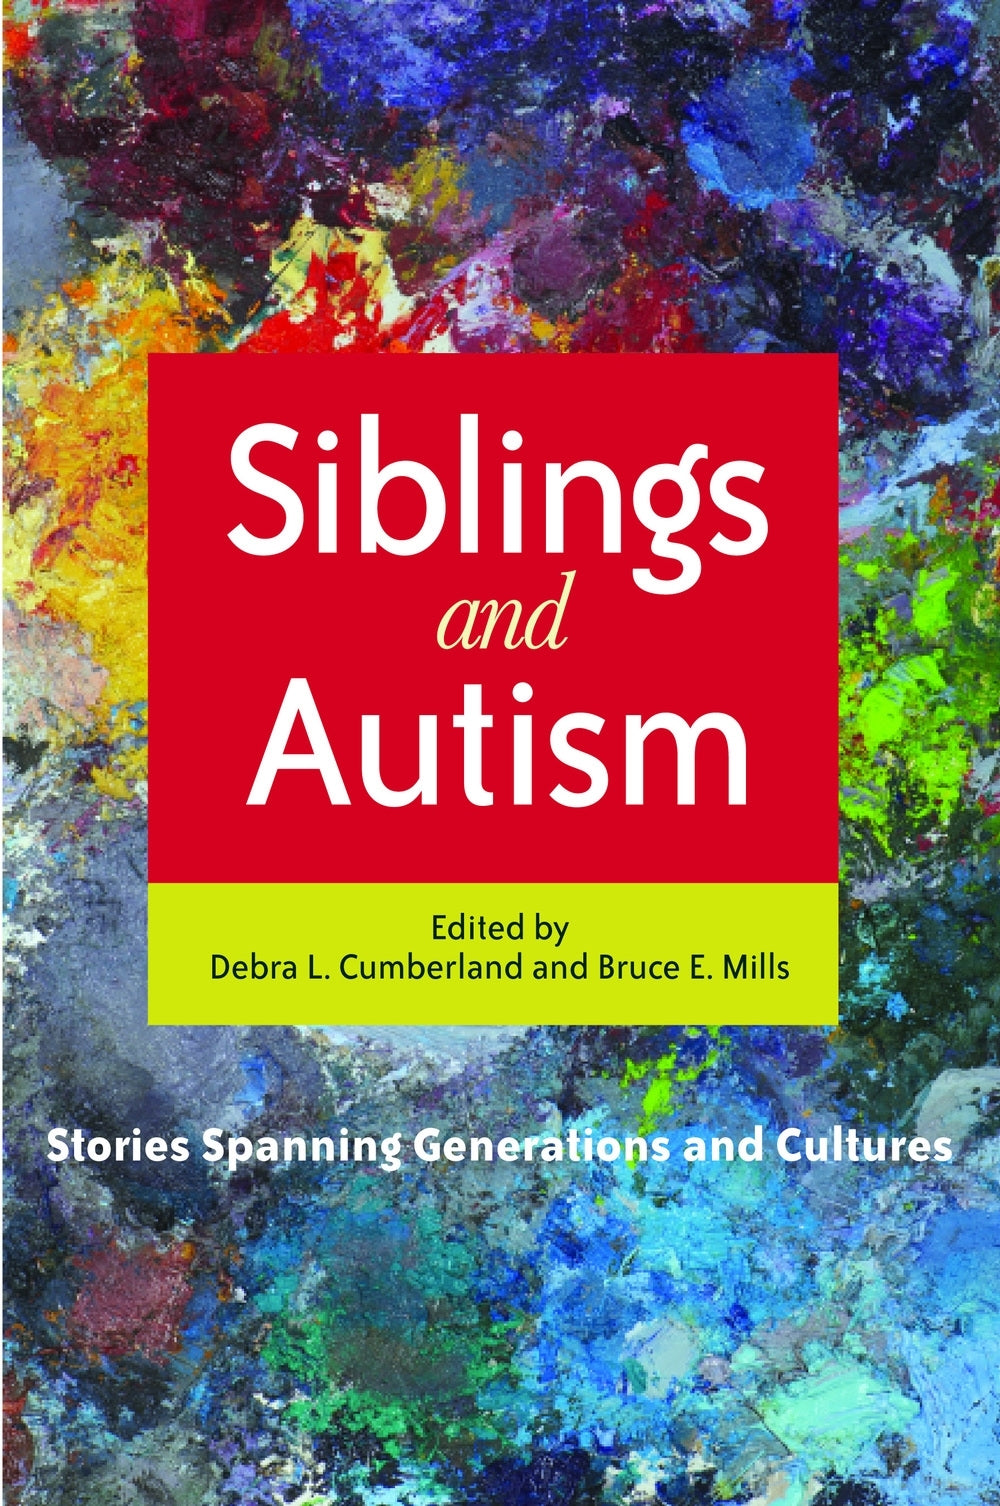 Siblings and Autism by No Author Listed, Debra Cumberland, Bruce Mills